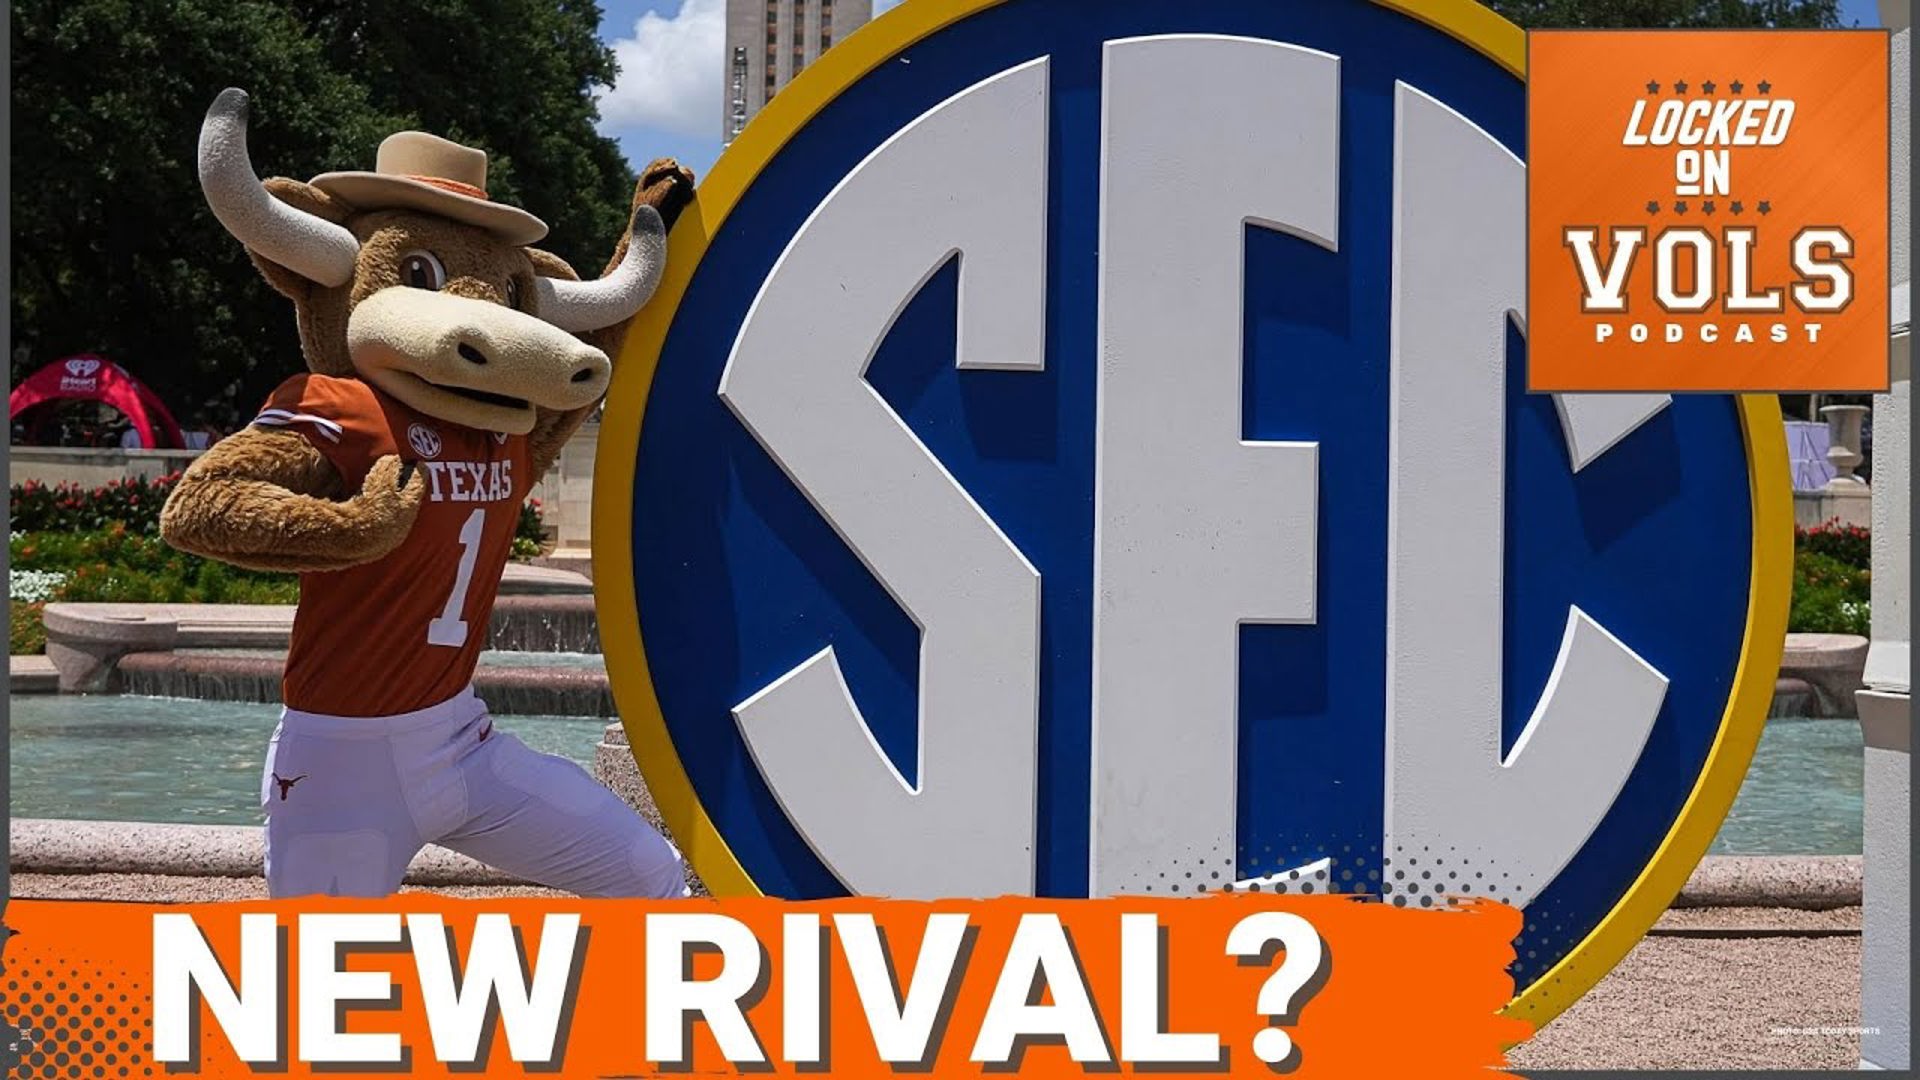 Tennessee Football: New Rivalries with Texas, Oklahoma now joining SEC. Conference Expansion